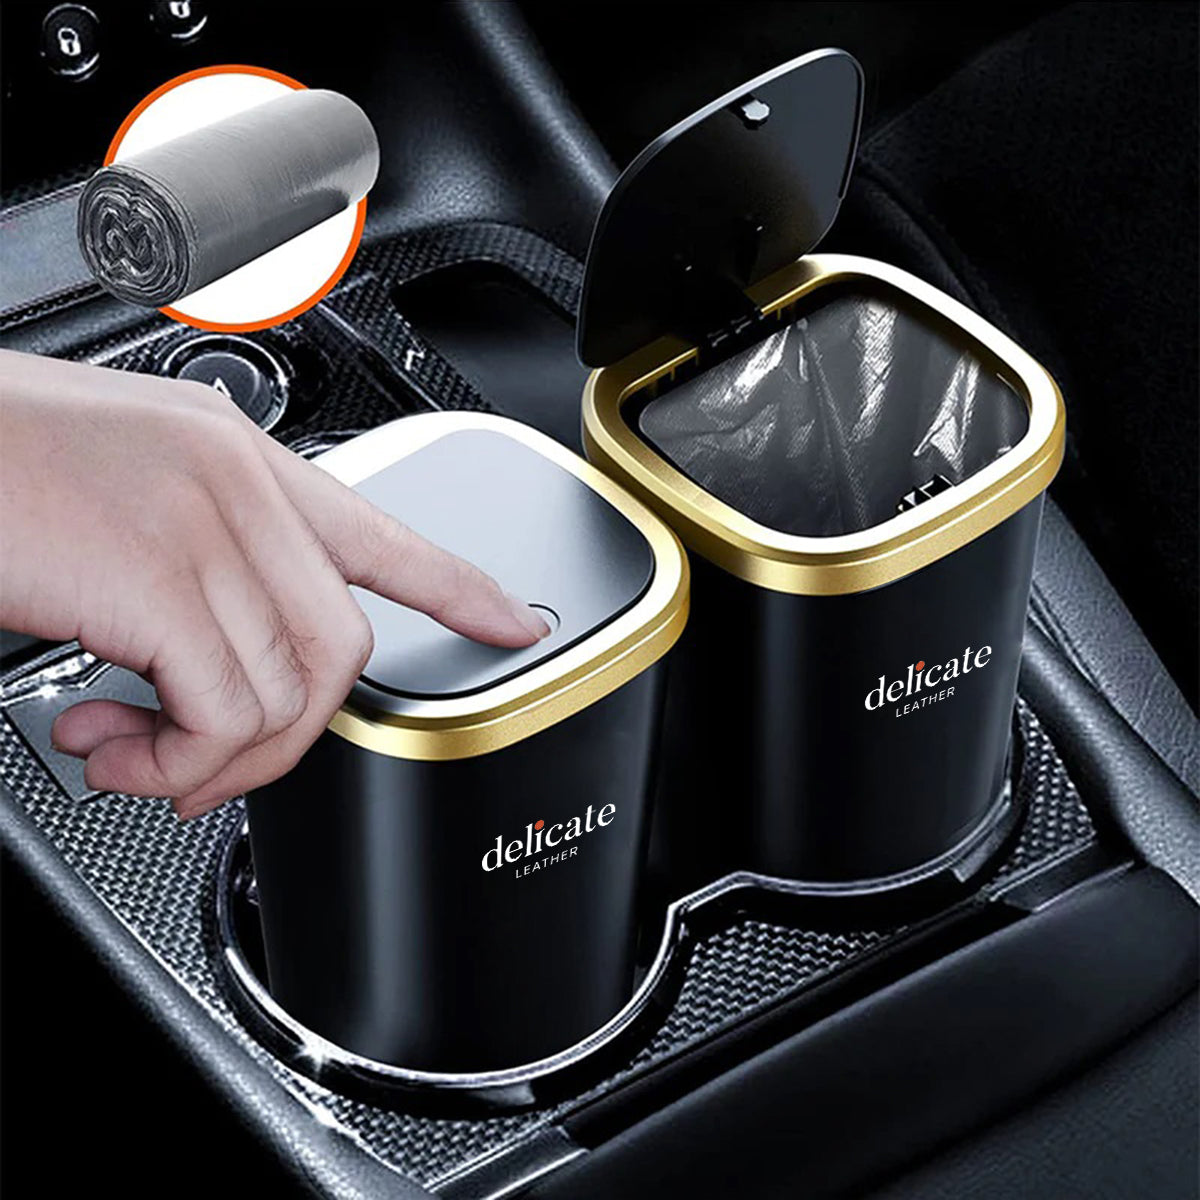 Car Trash Cans, Custom For Your Cars, Compact & Durable Car Accessories for Interior Use 2 Pack, Practical Car Organizers and Storage Cups with Pop-Up Open, Car Accessories JG11993 - Delicate Leather